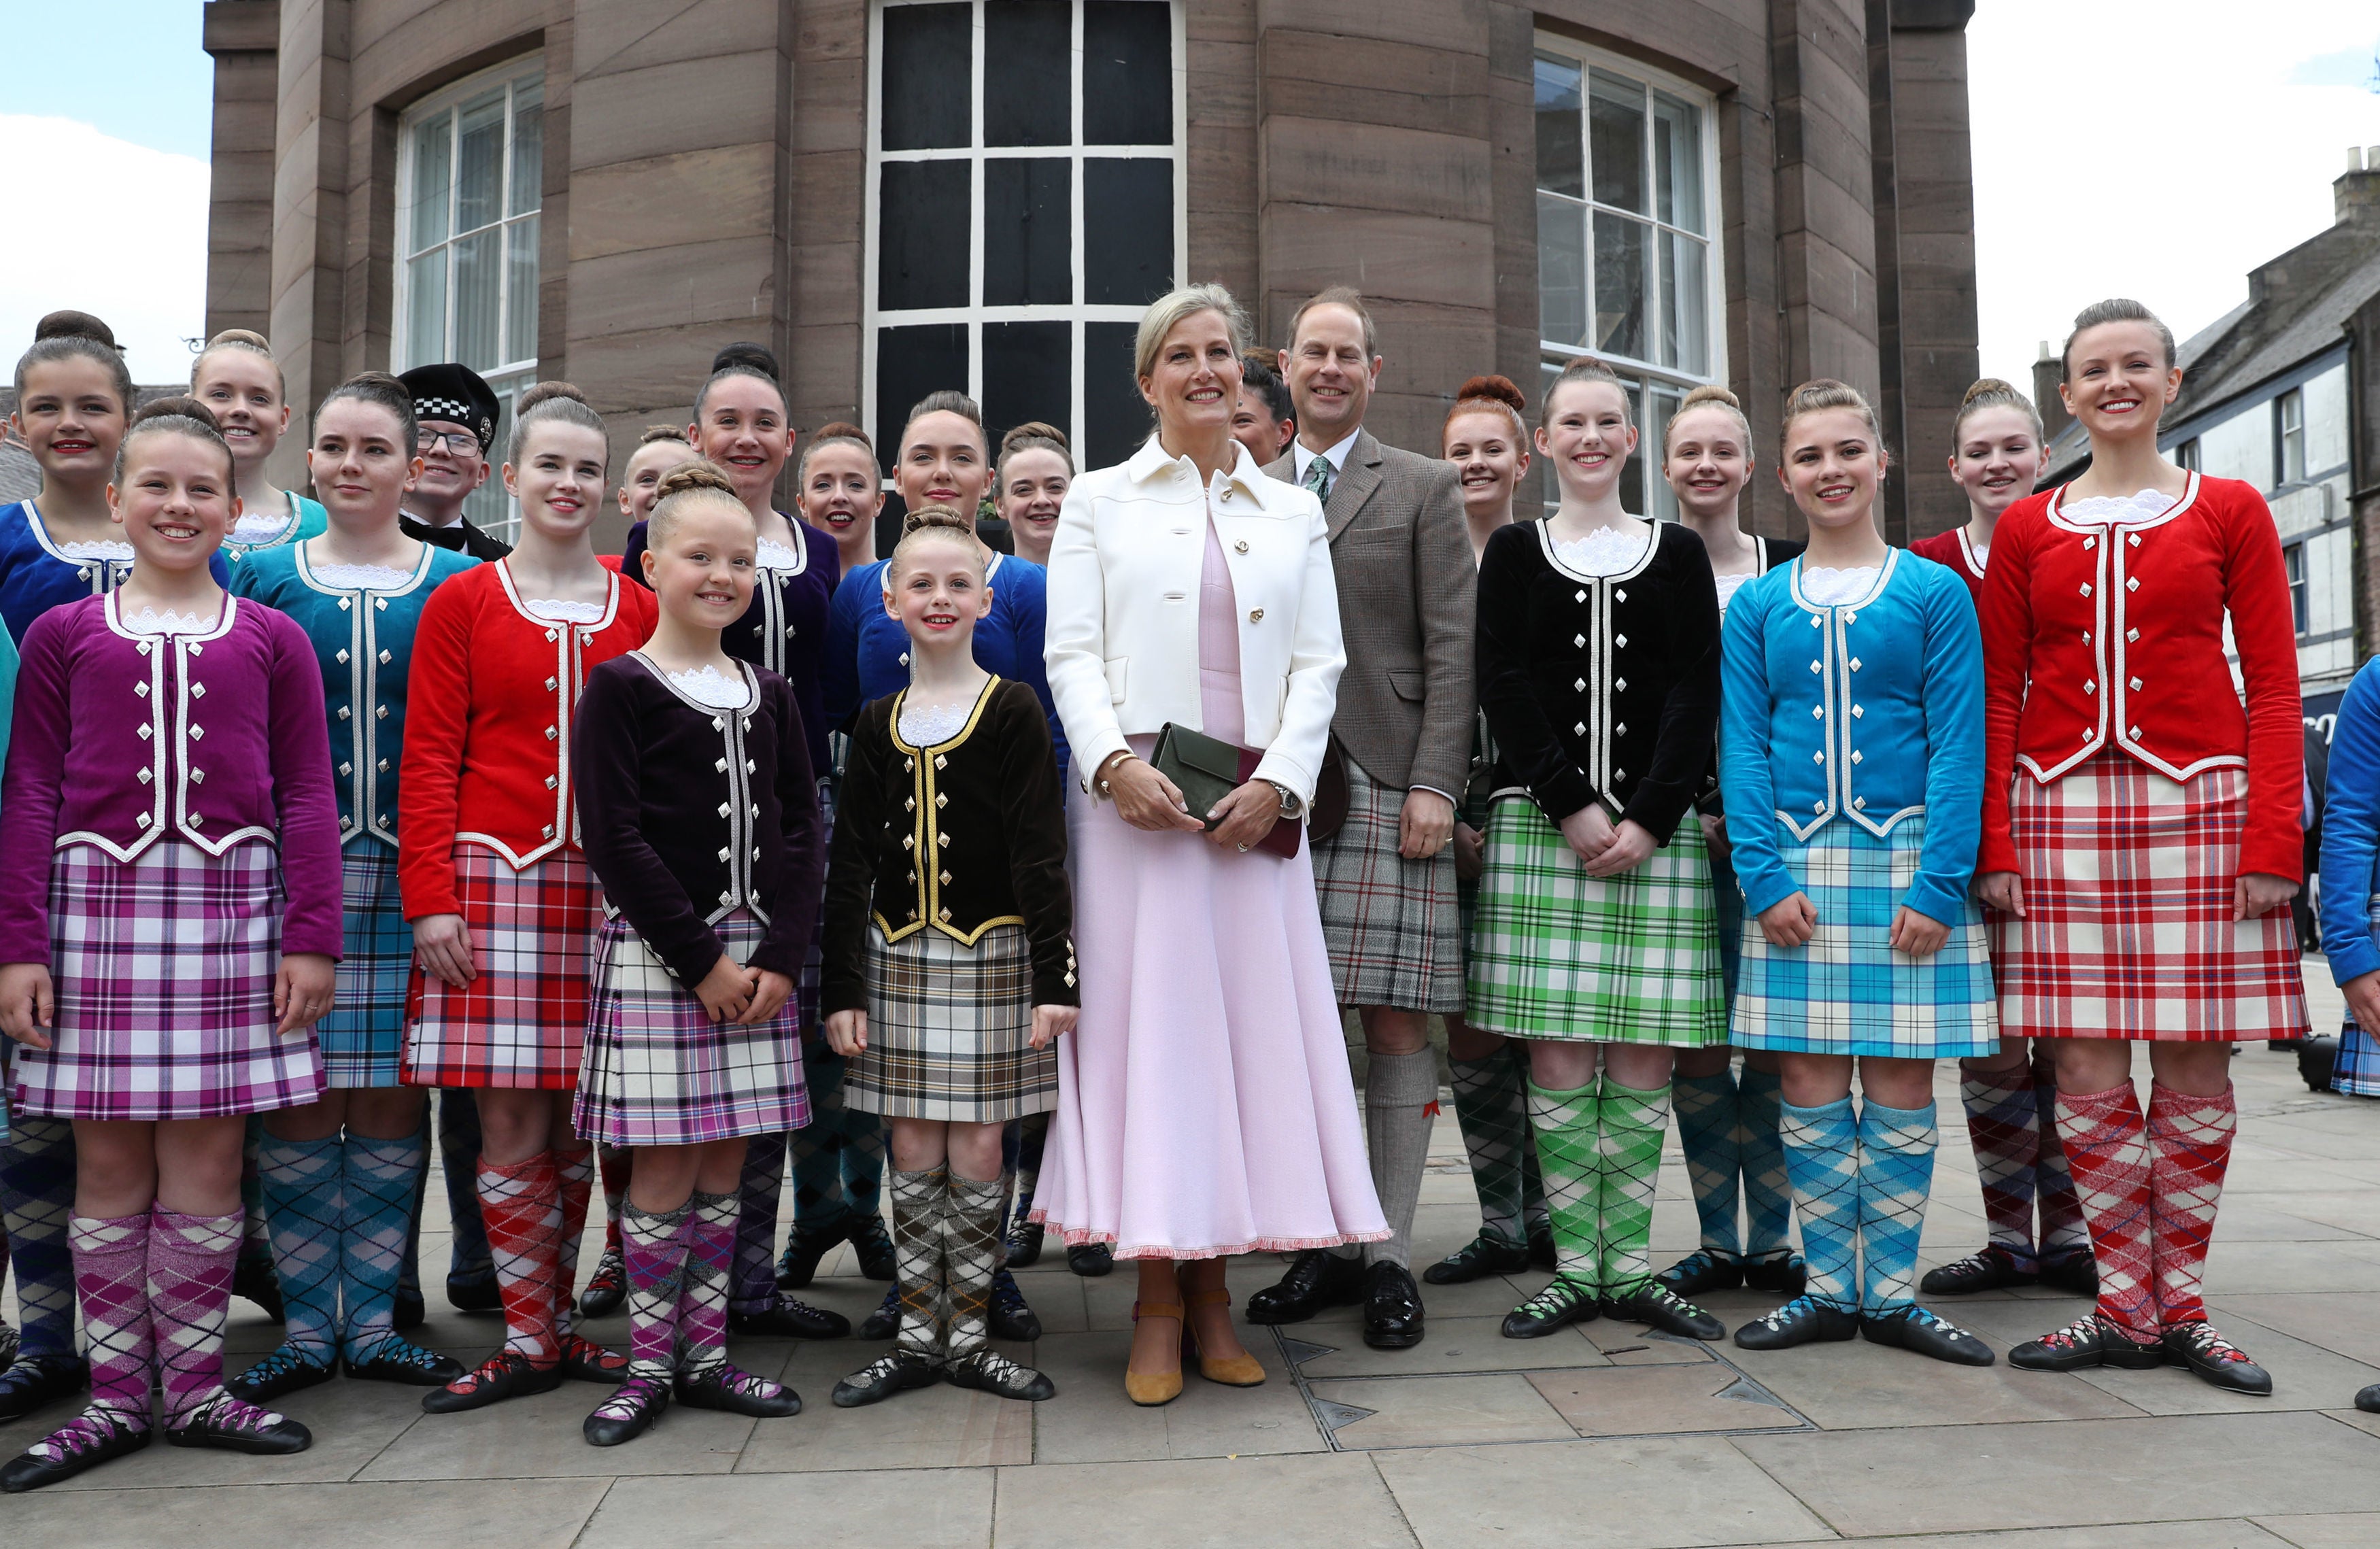 Prince Edward and Sophie Wessex, known in Scotland as the Earl and Countess of Forfar, pictured with highland dancers in Forfar, Angus, in 2019